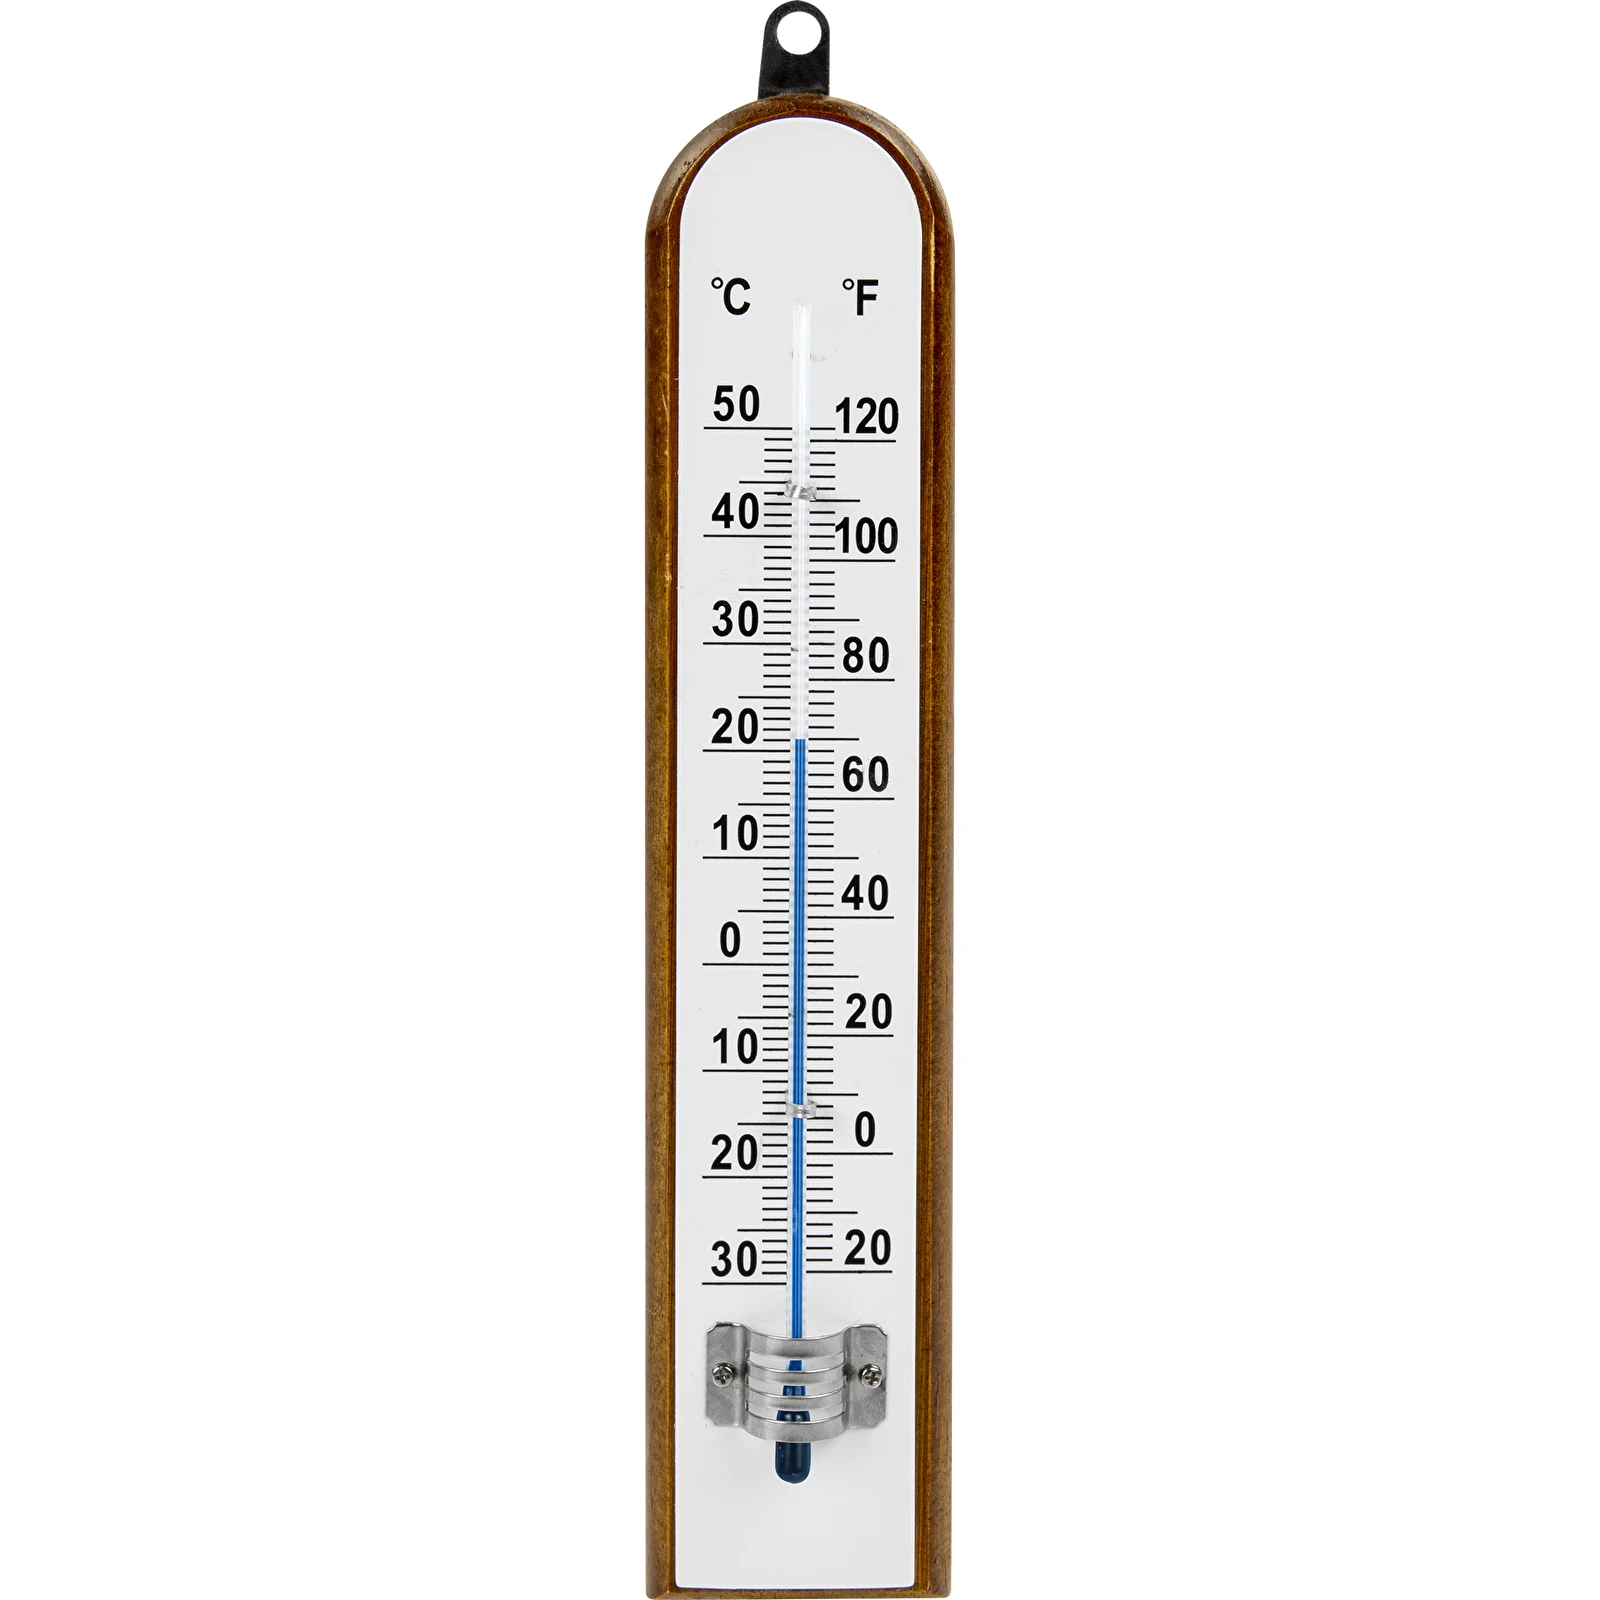 https://browin.com/static/images/1600/room-thermometer-with-white-scale-30-c-to-50-c-20cm-012600.webp